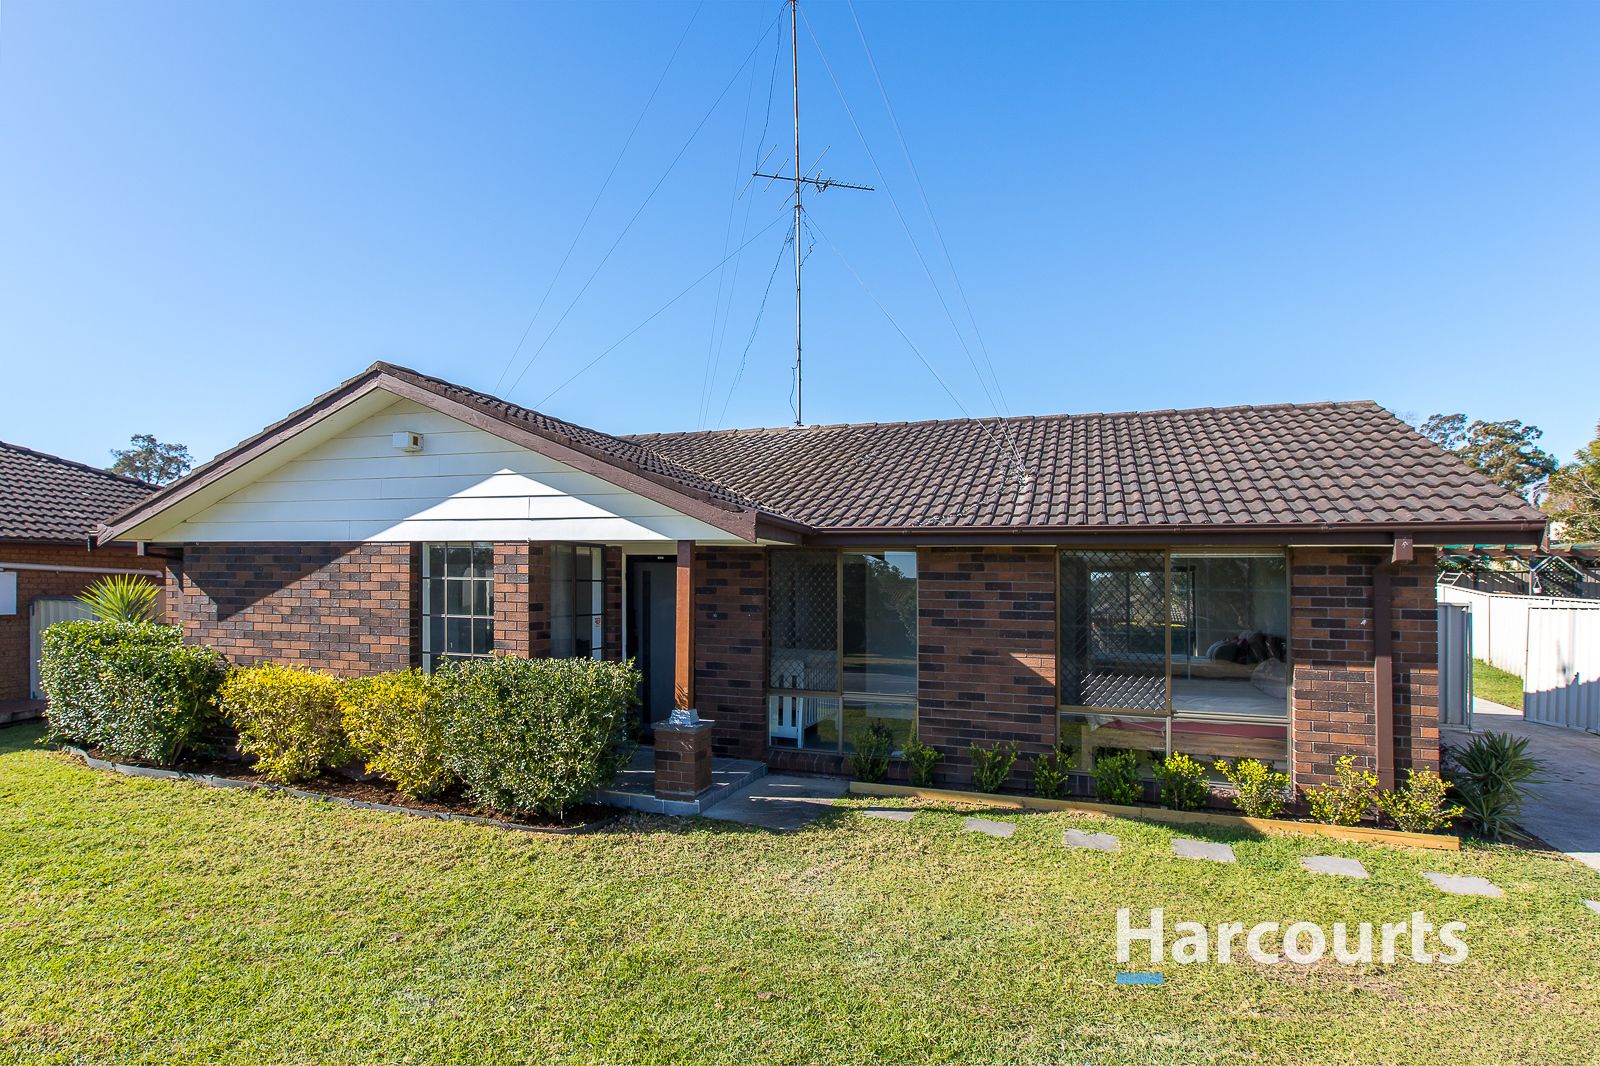 3 bedrooms House in 64 Regiment Road RUTHERFORD NSW, 2320